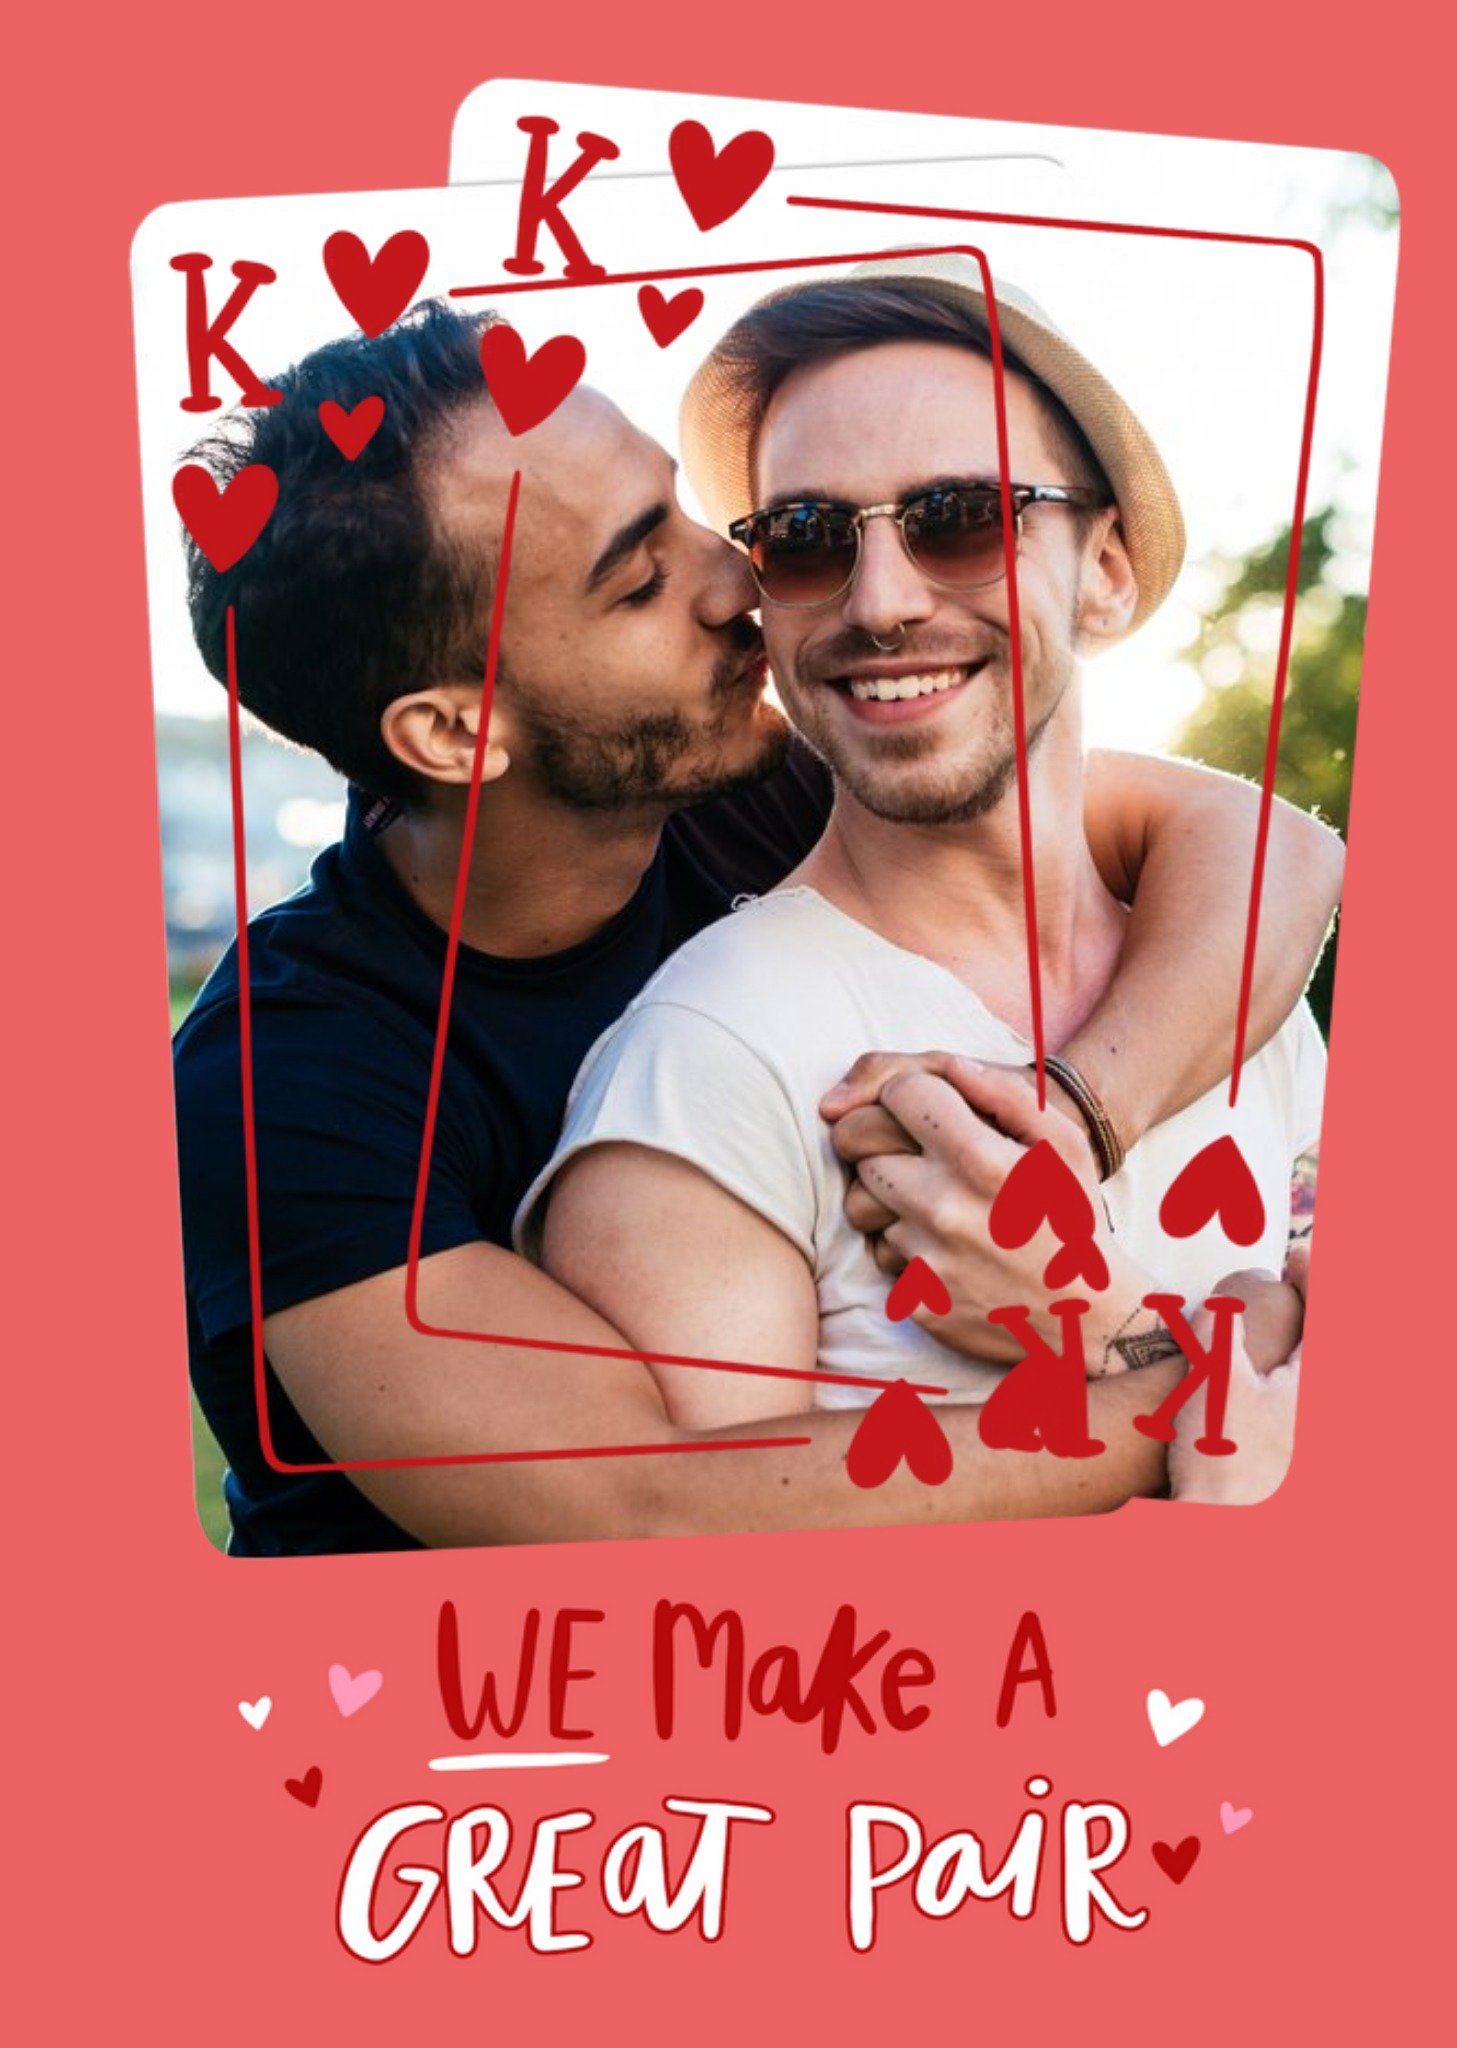 Moonpig We Make A Great Pair Red Playing Cards Photo Upload Valentines Card Ecard